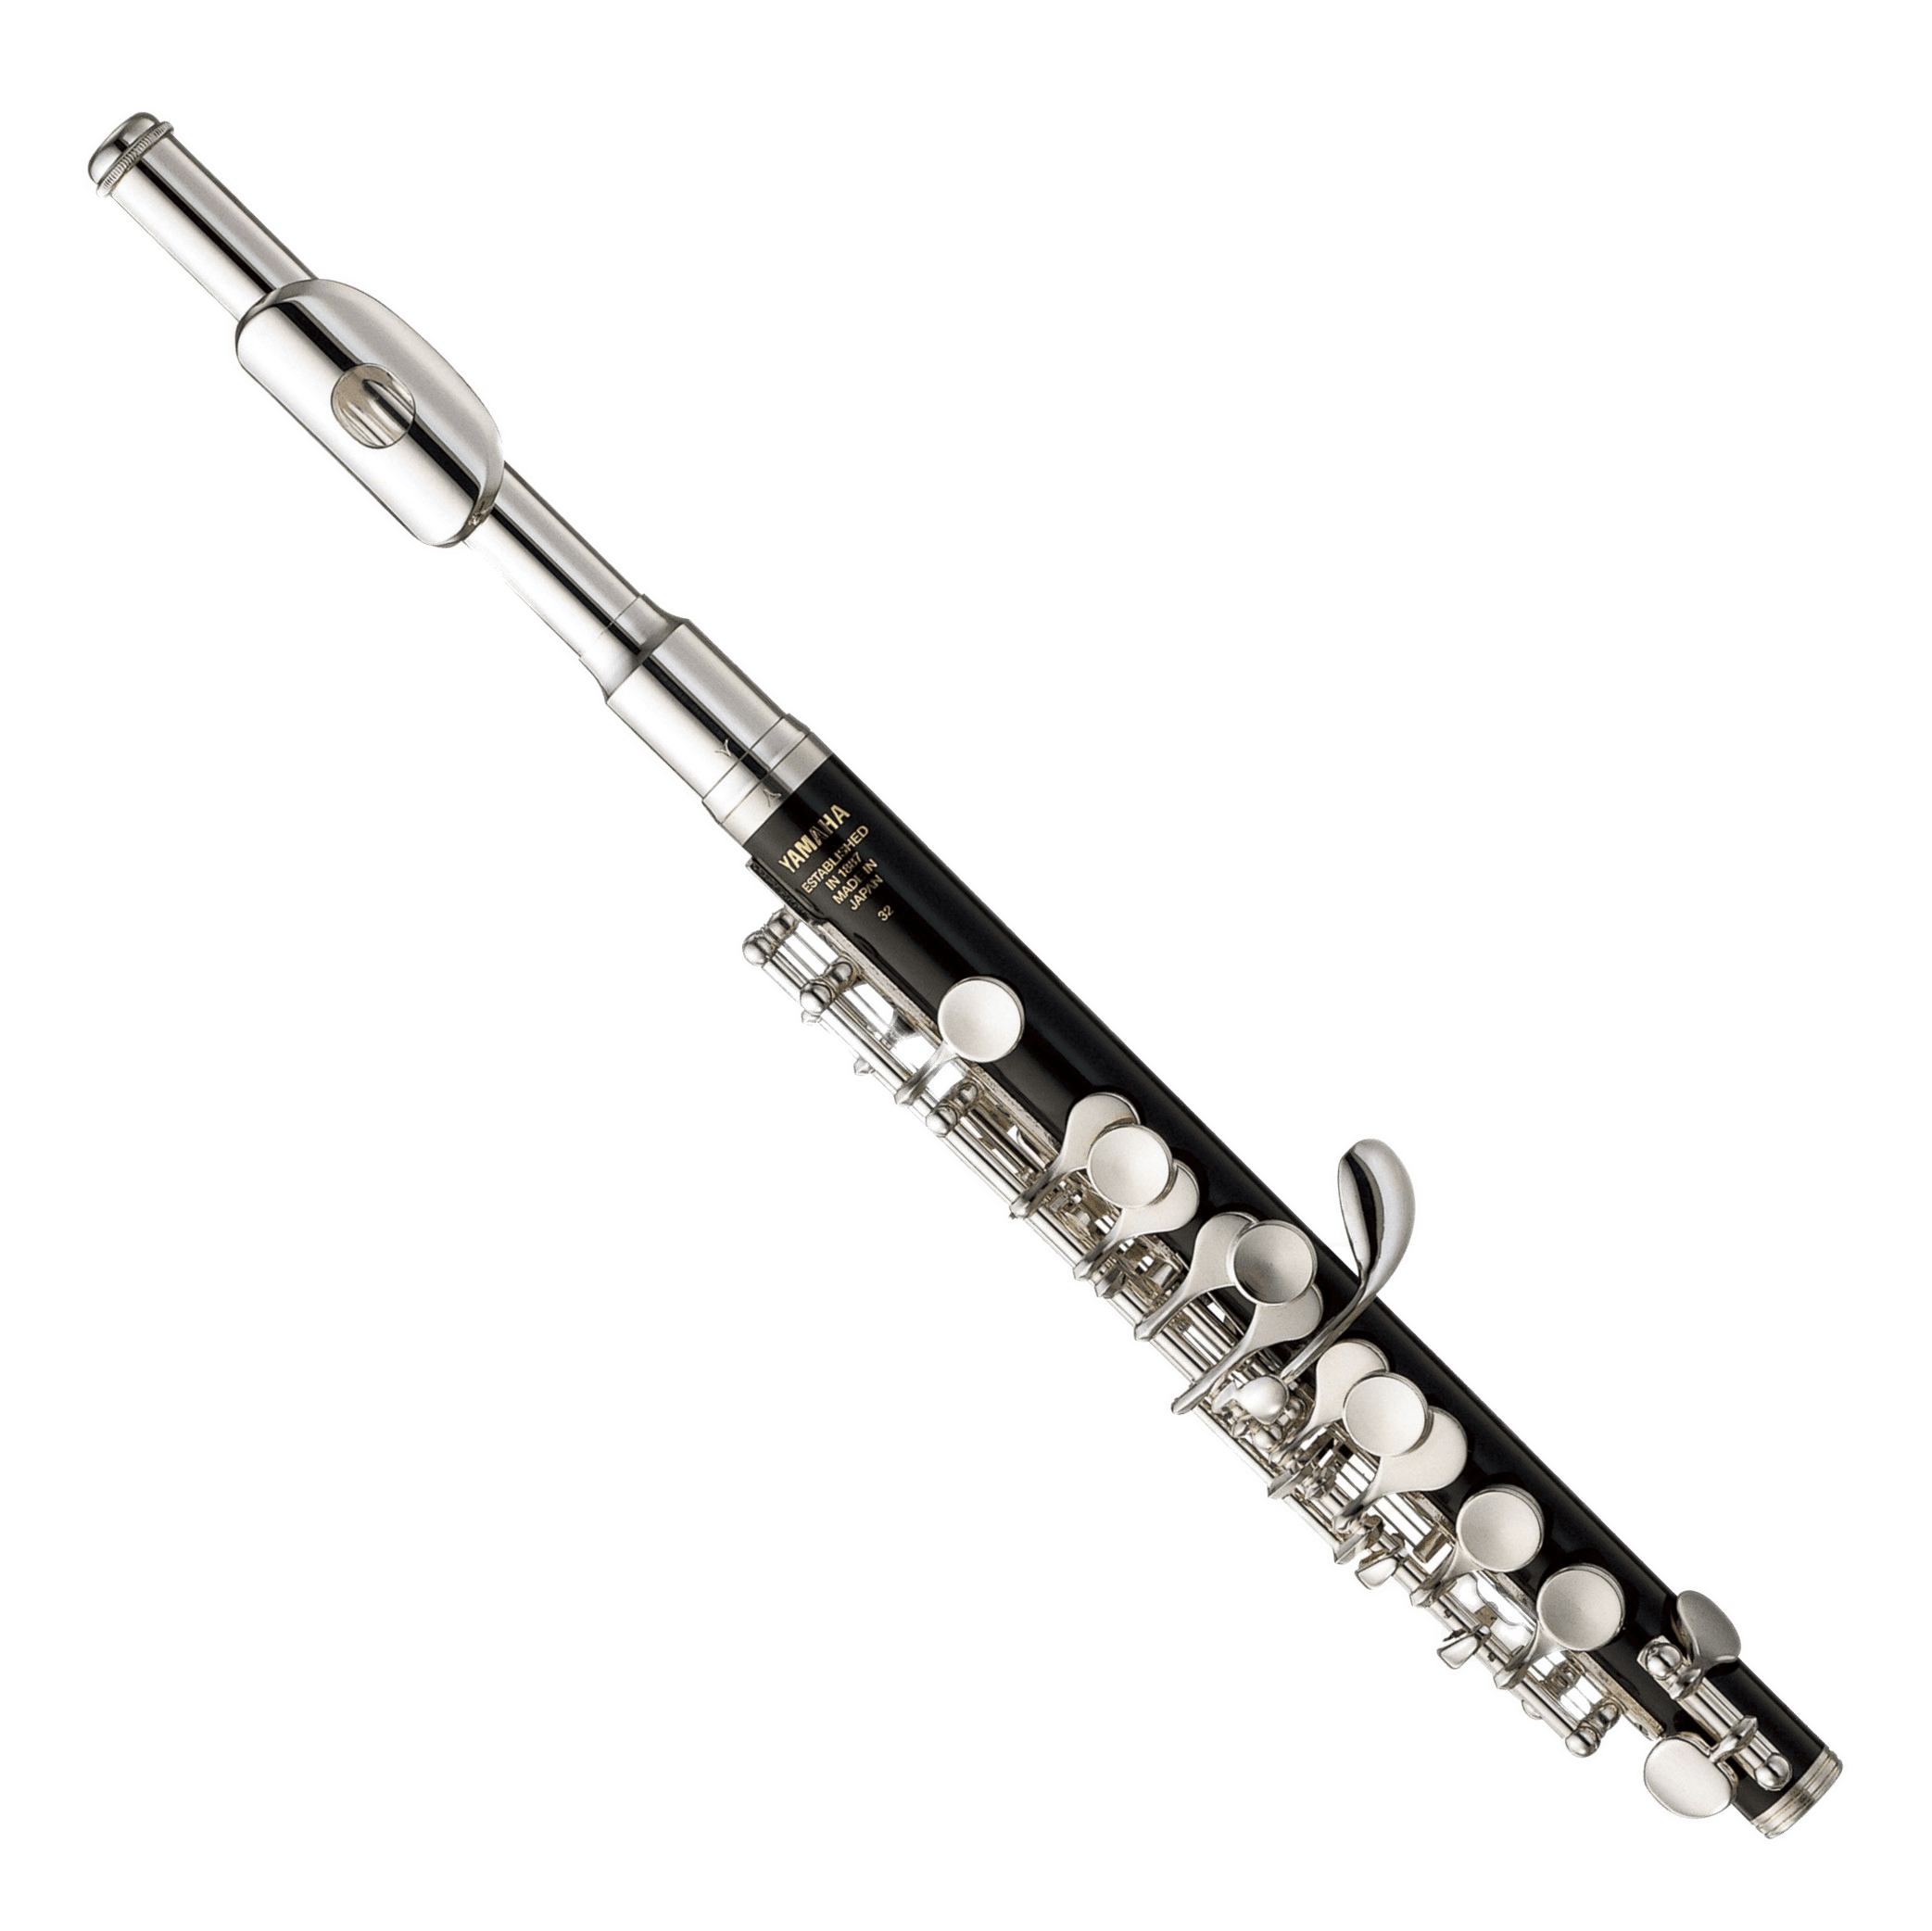 flute clipart musical instruments